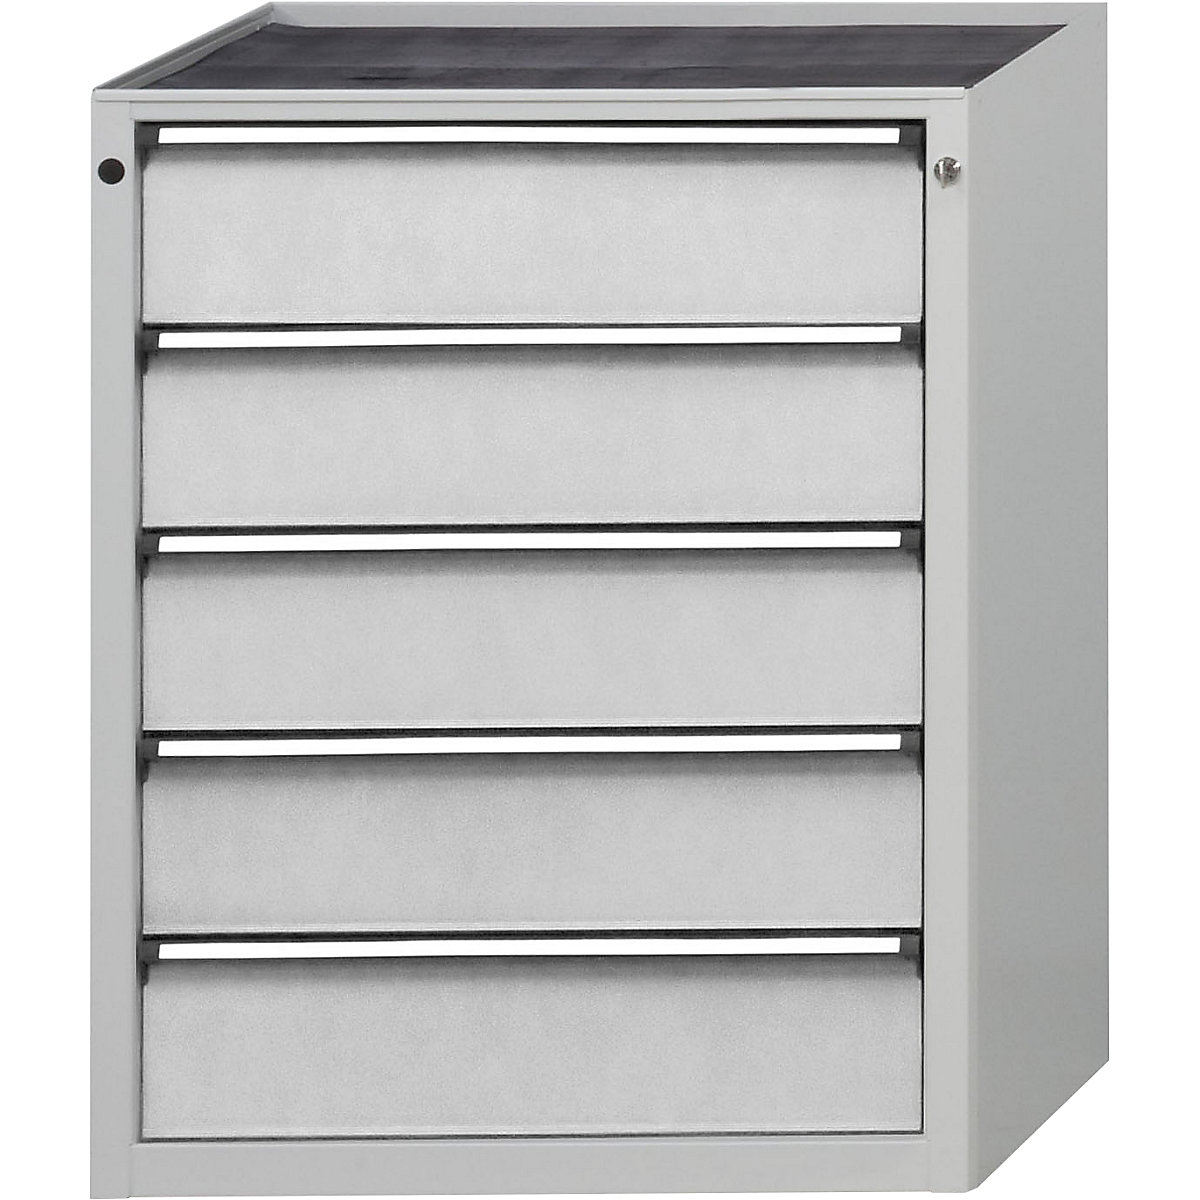 Drawer cupboard – ANKE, WxD 760 x 675 mm, 5 drawers, height 980 mm, front in light grey-13